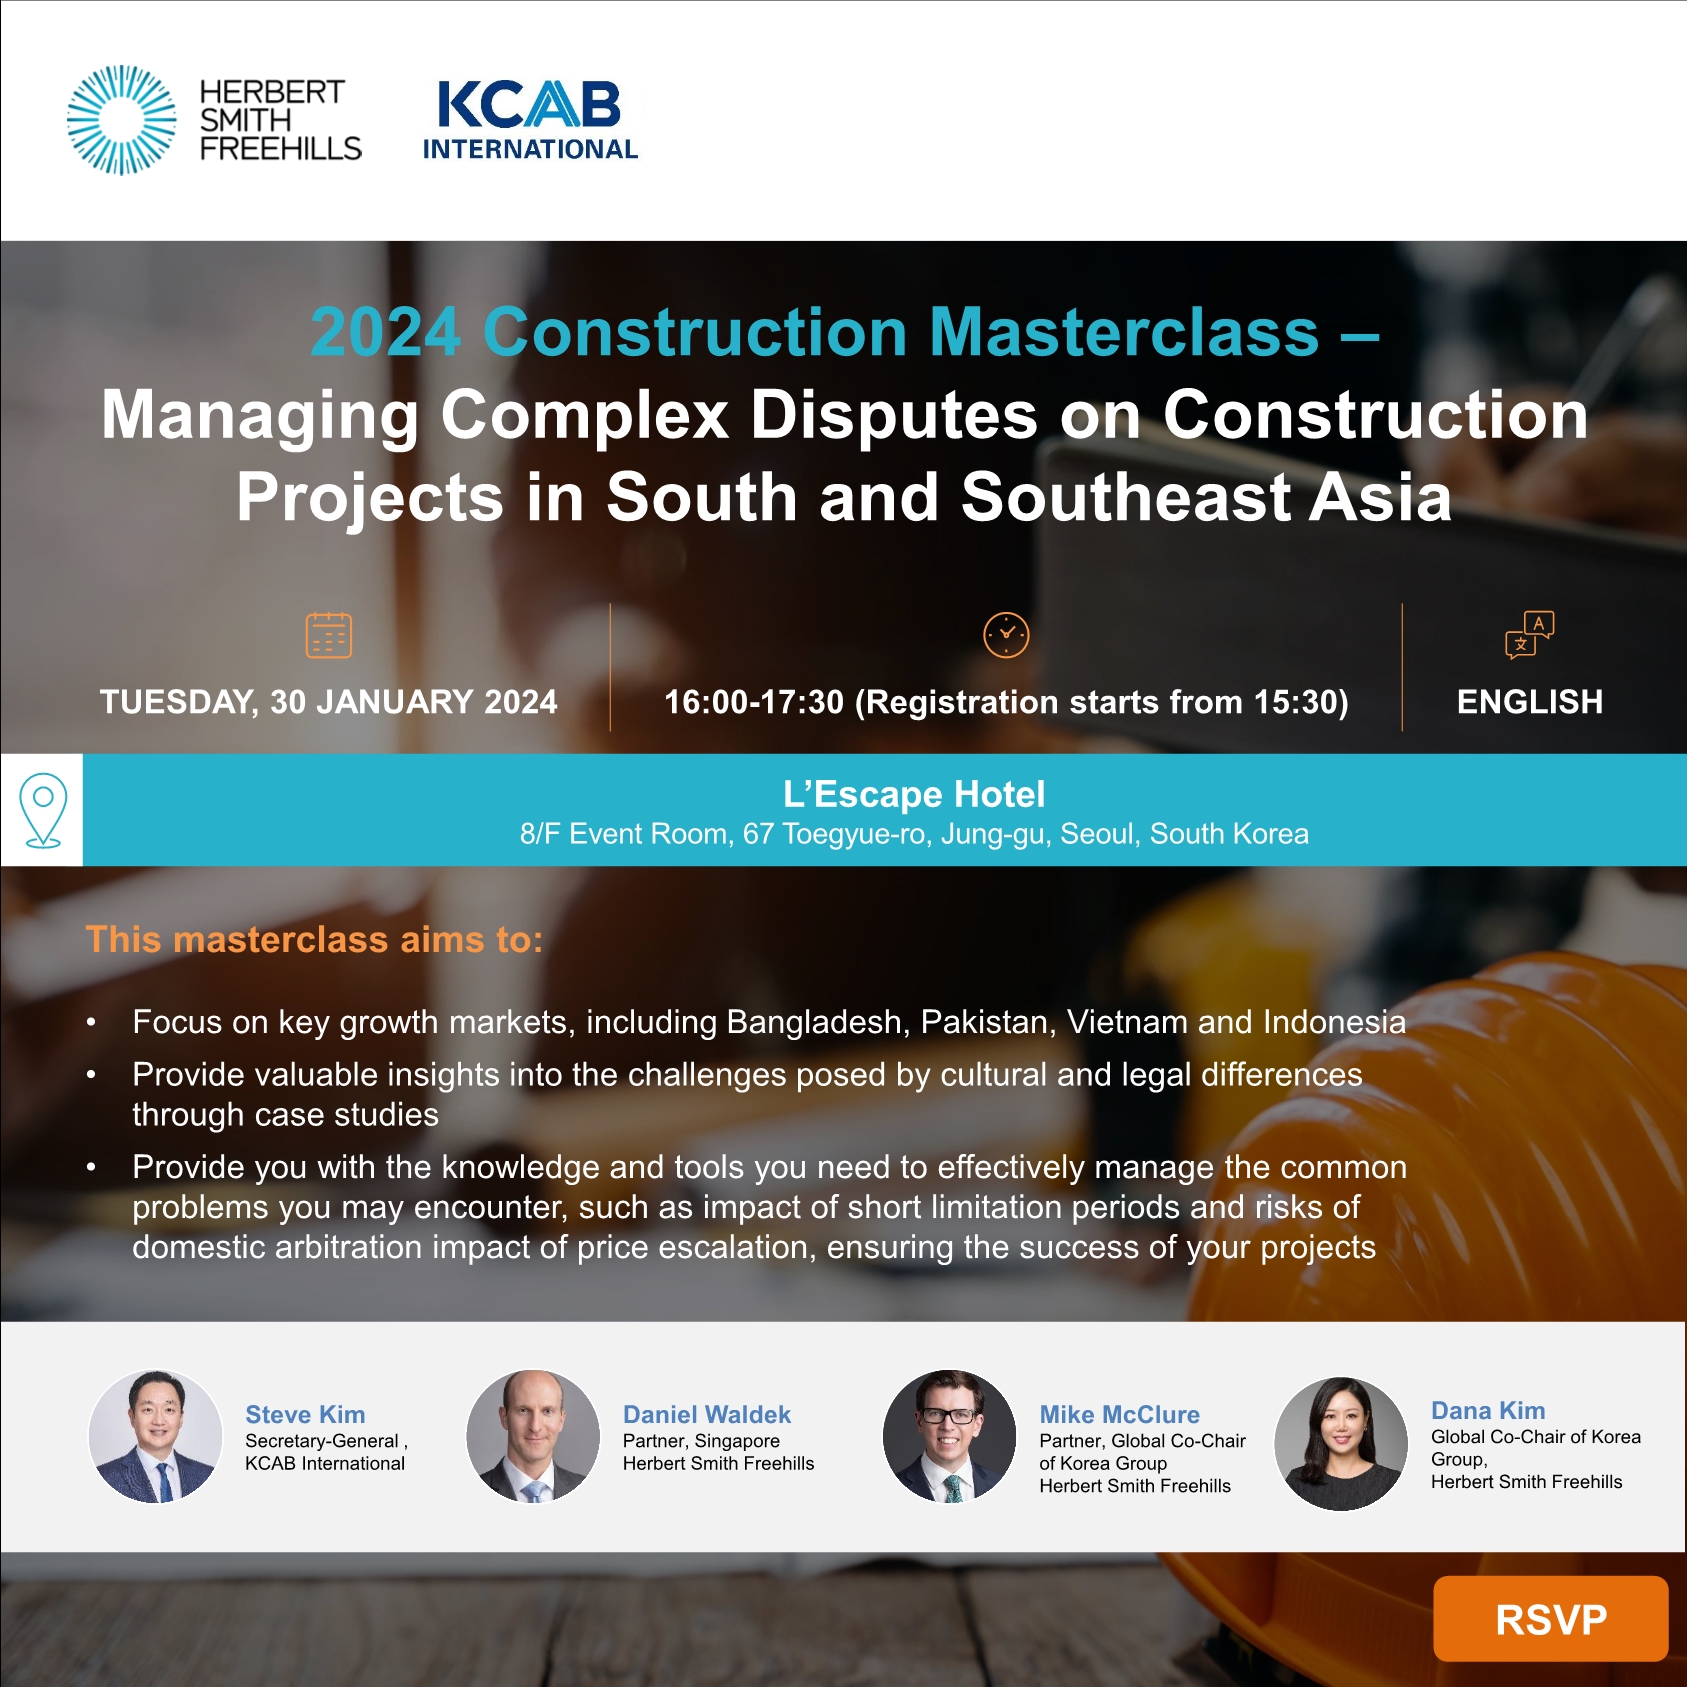 [Seminar] 2024 Construction Masterclass: Managing Complex Disputes on Construction Projects in South and Southeast Asia